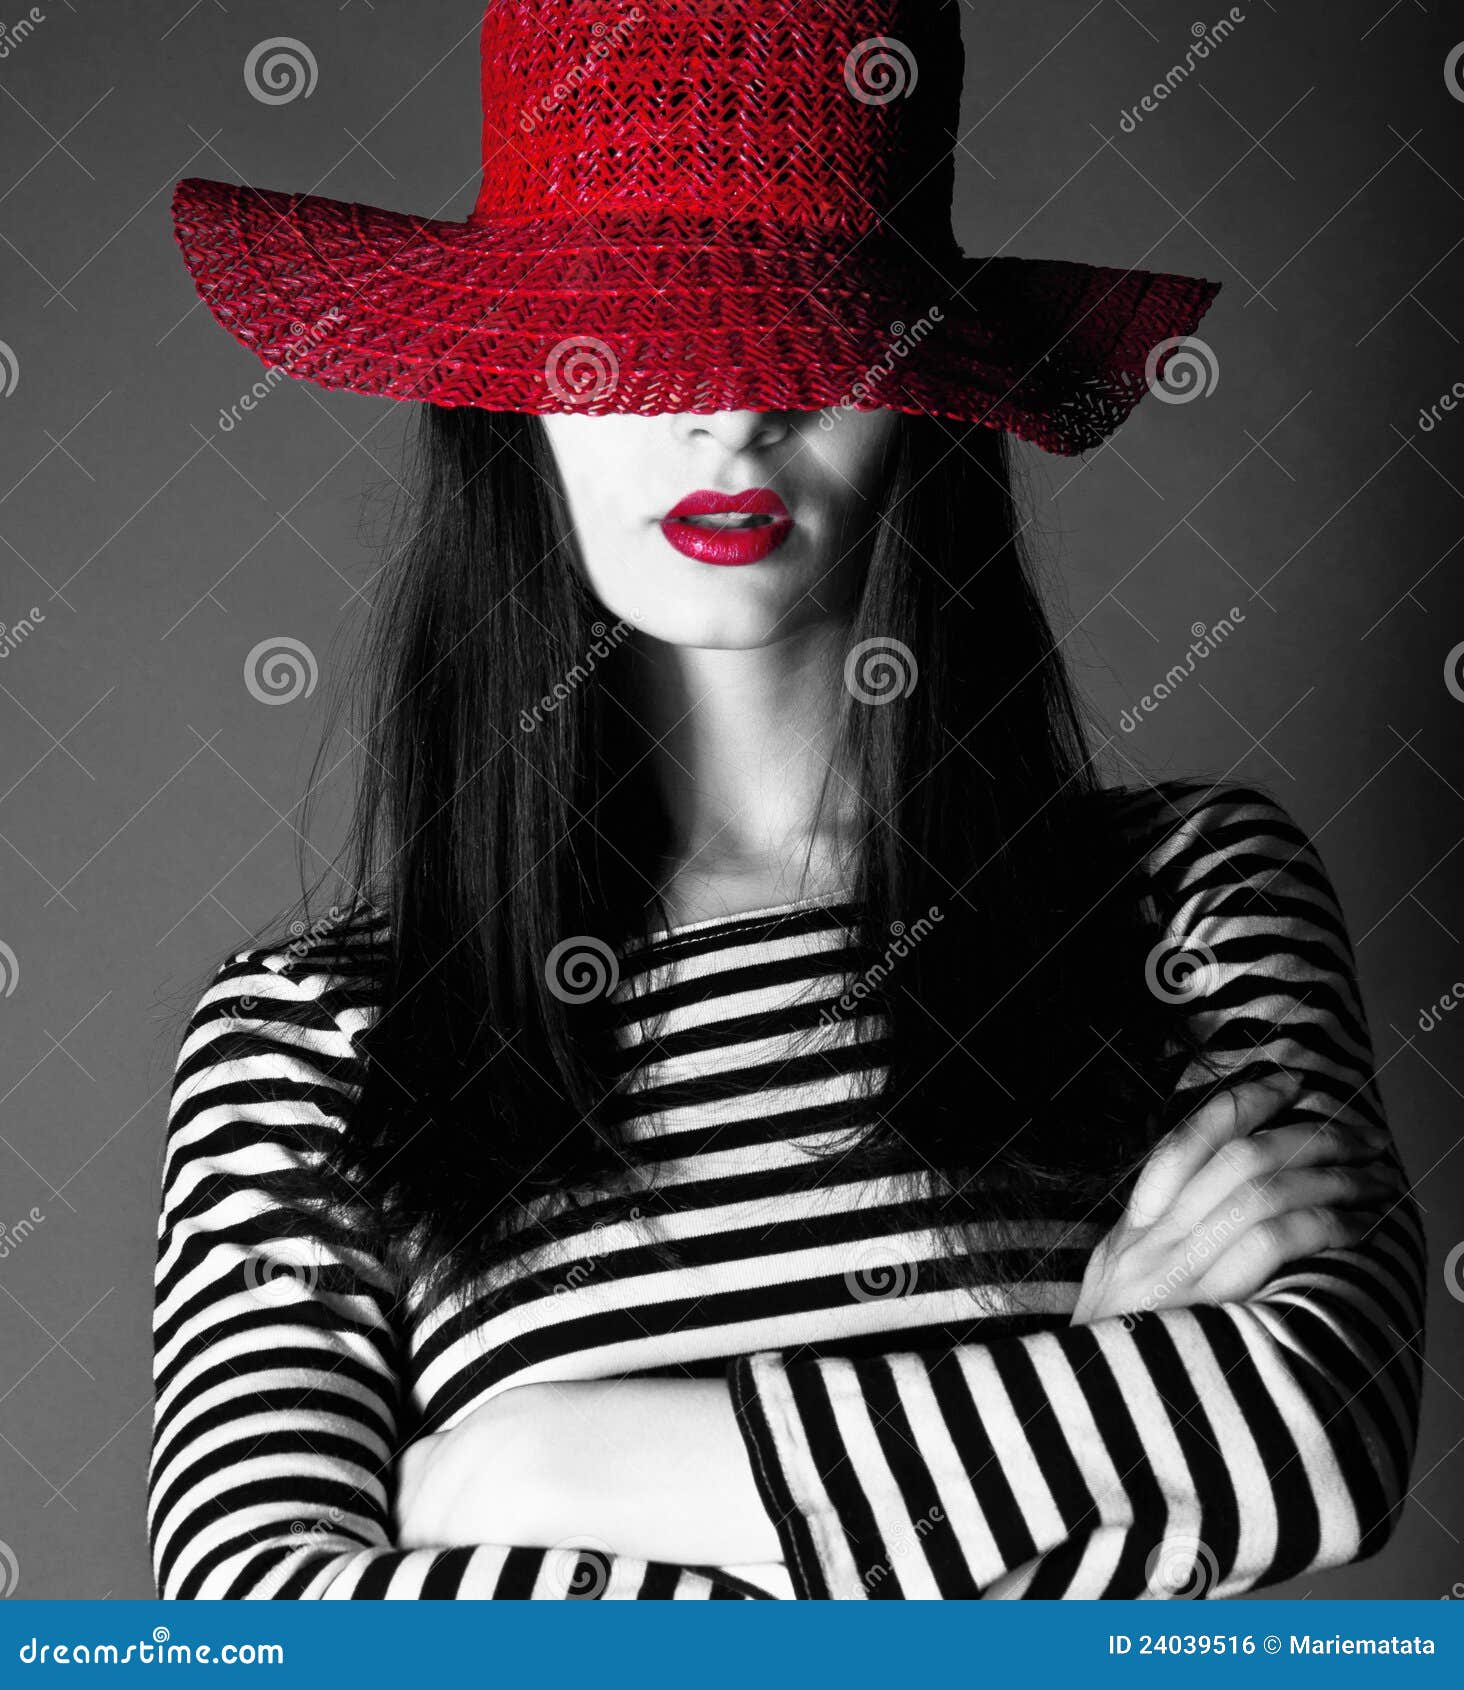 Sexy Girl In A Red Hat With Red Lips Royalty Free Stock Image Image 24039516